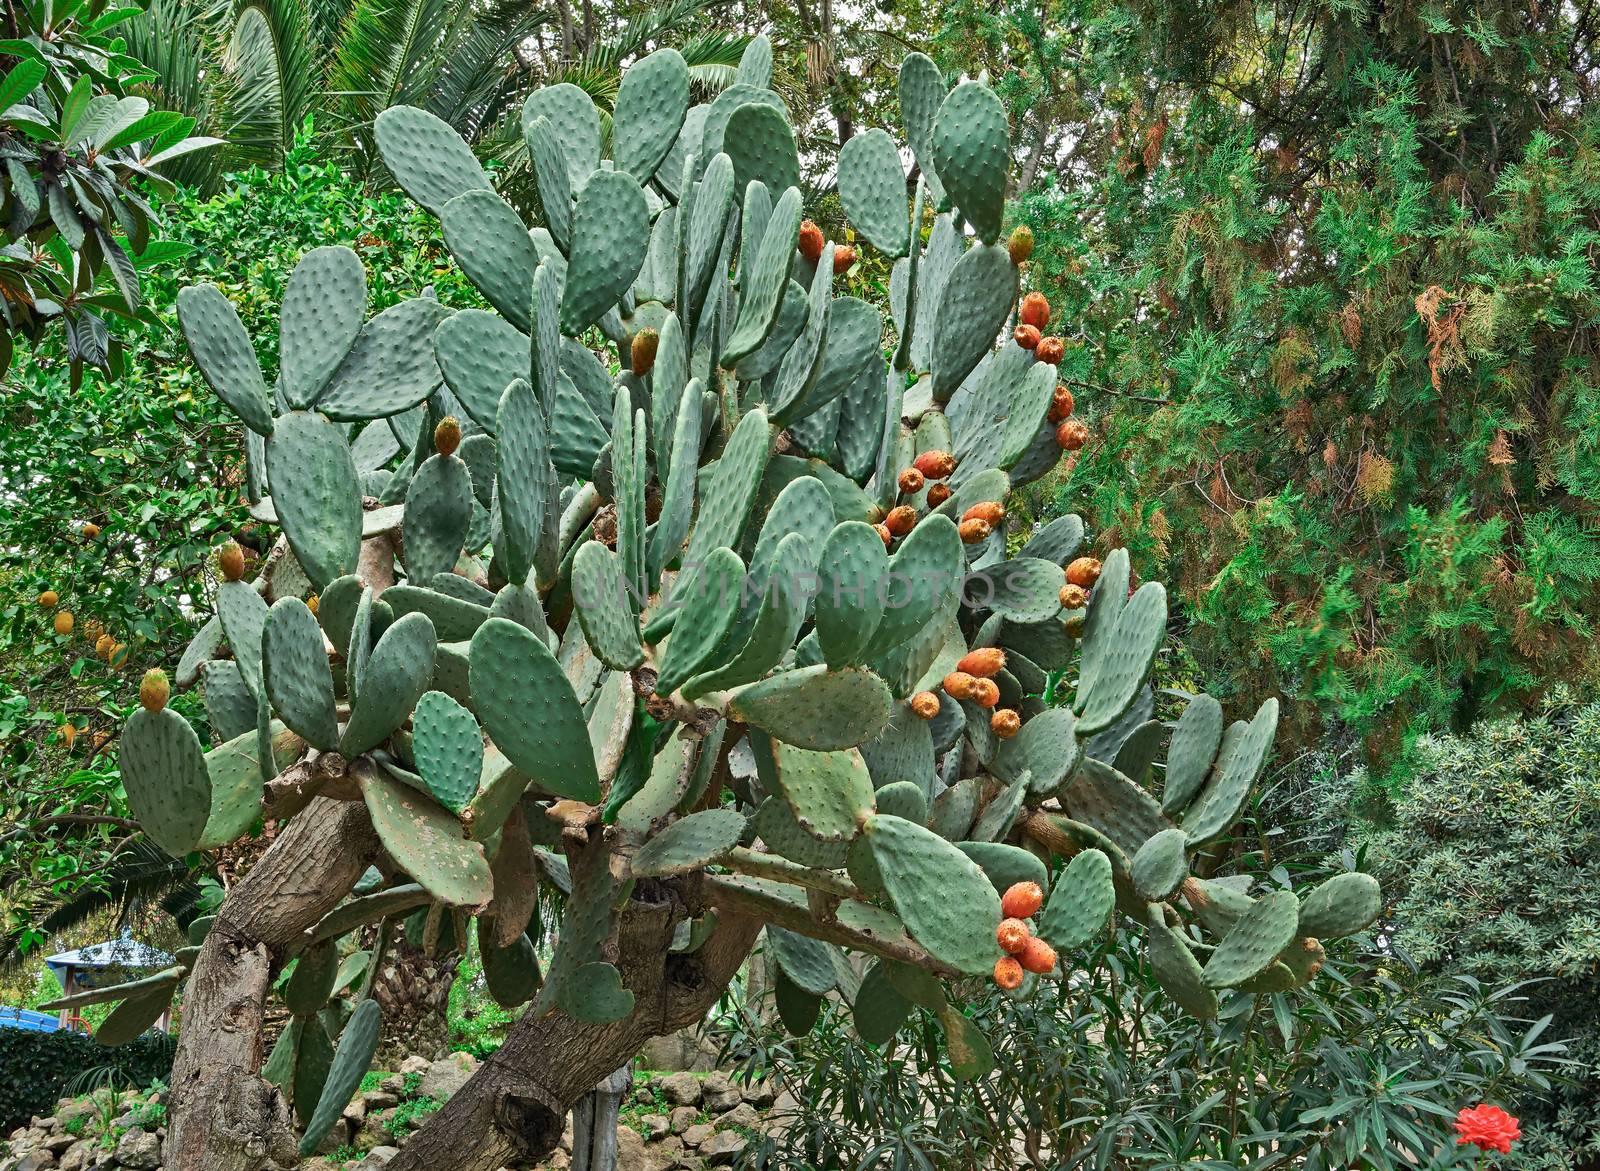 Prickly pear cactus, Opuntia, with fruit. The fruit, known as tuna, are used for food.